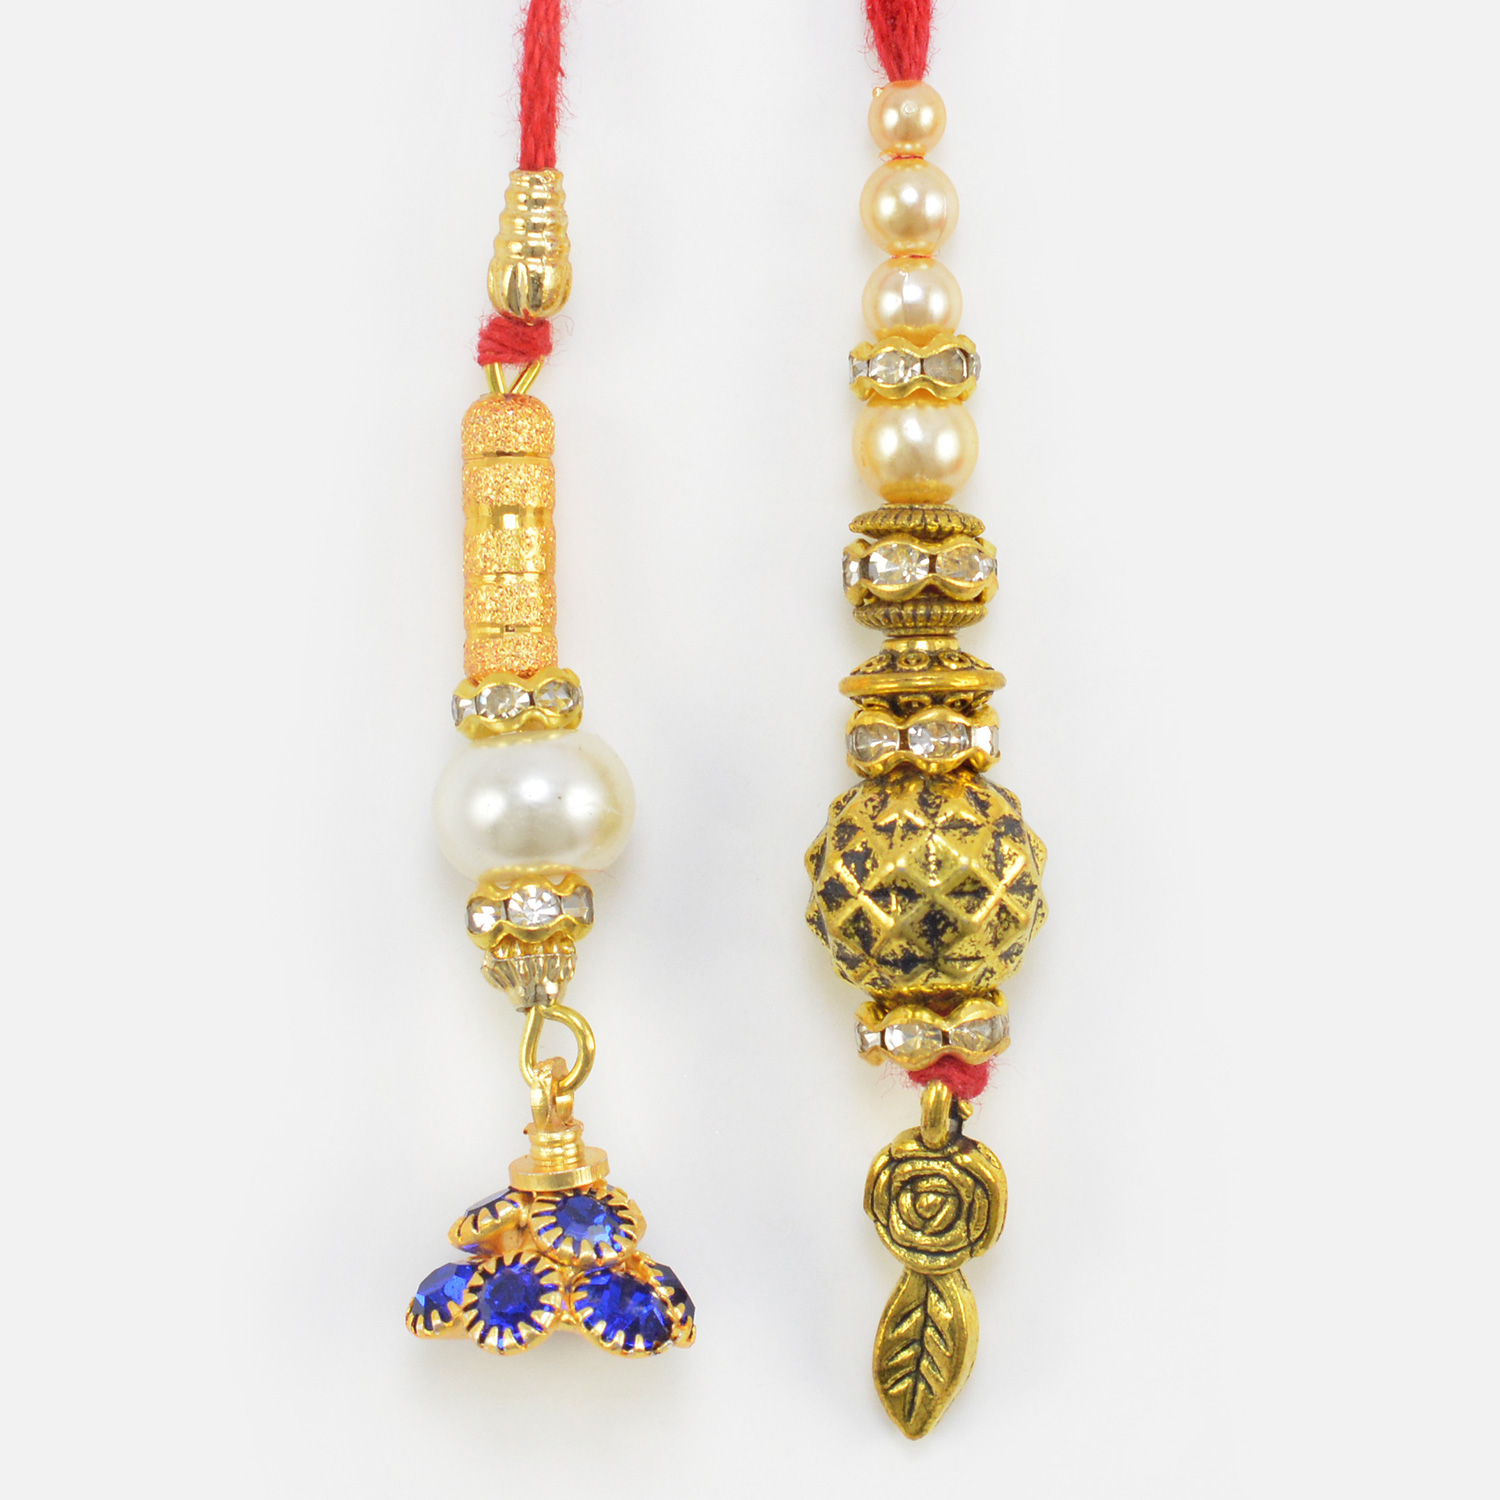 Blue Stones Studded and Golden Leaf Hanging Two Attractive Lumba Rakhis 